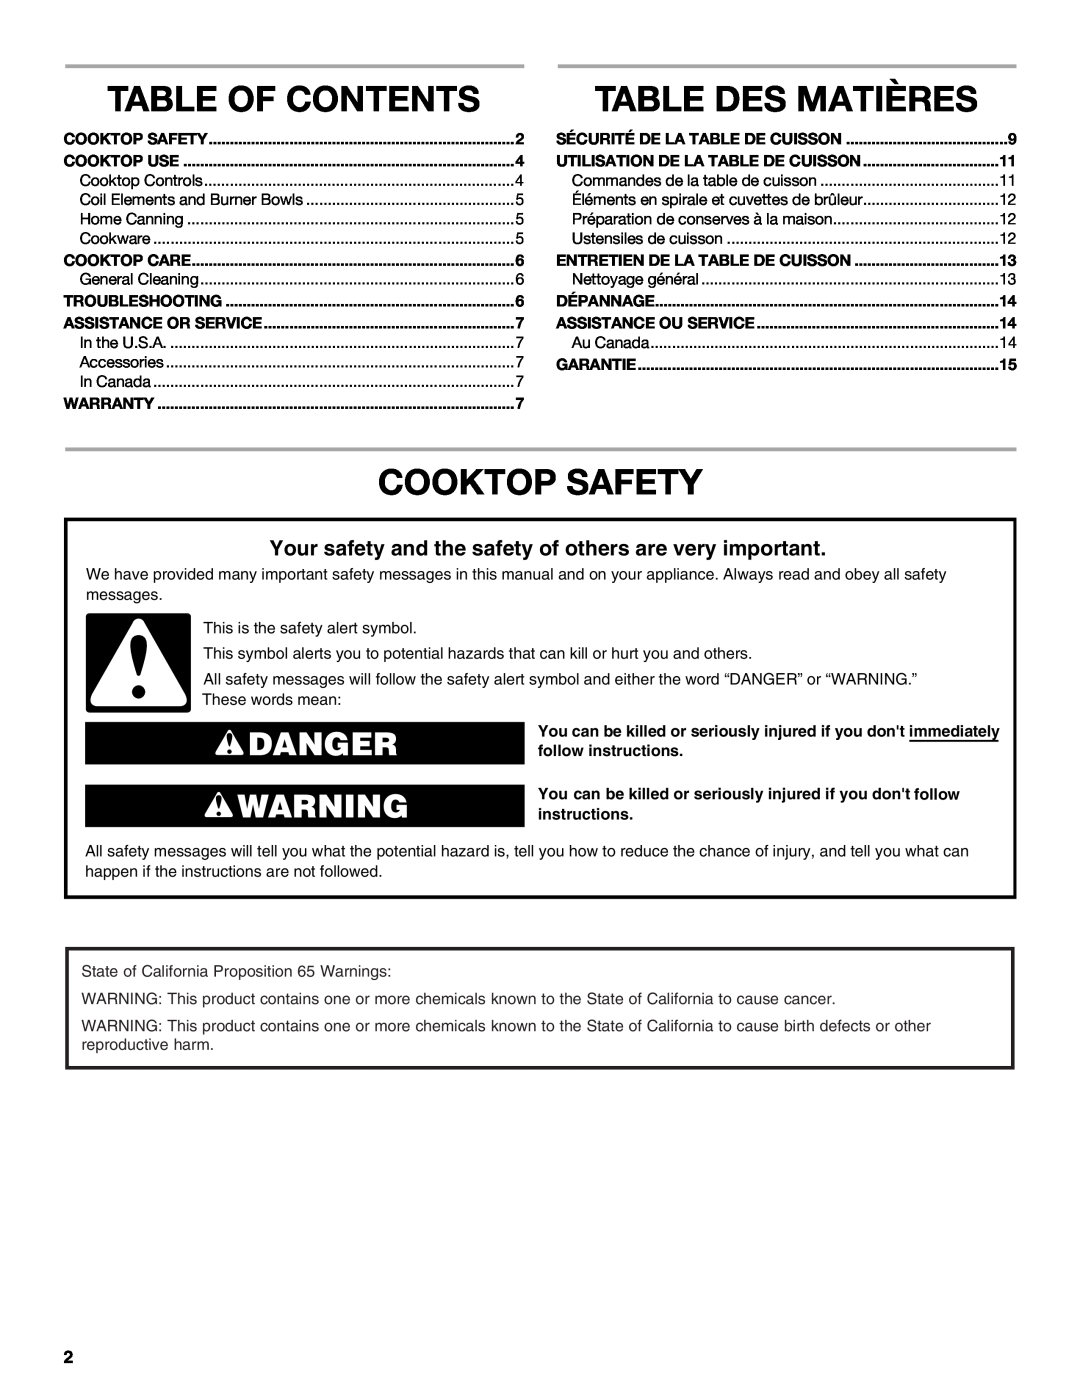 Whirlpool W10458809B manual Table Of Contents, Table Des Matières, Cooktop Safety, Danger 